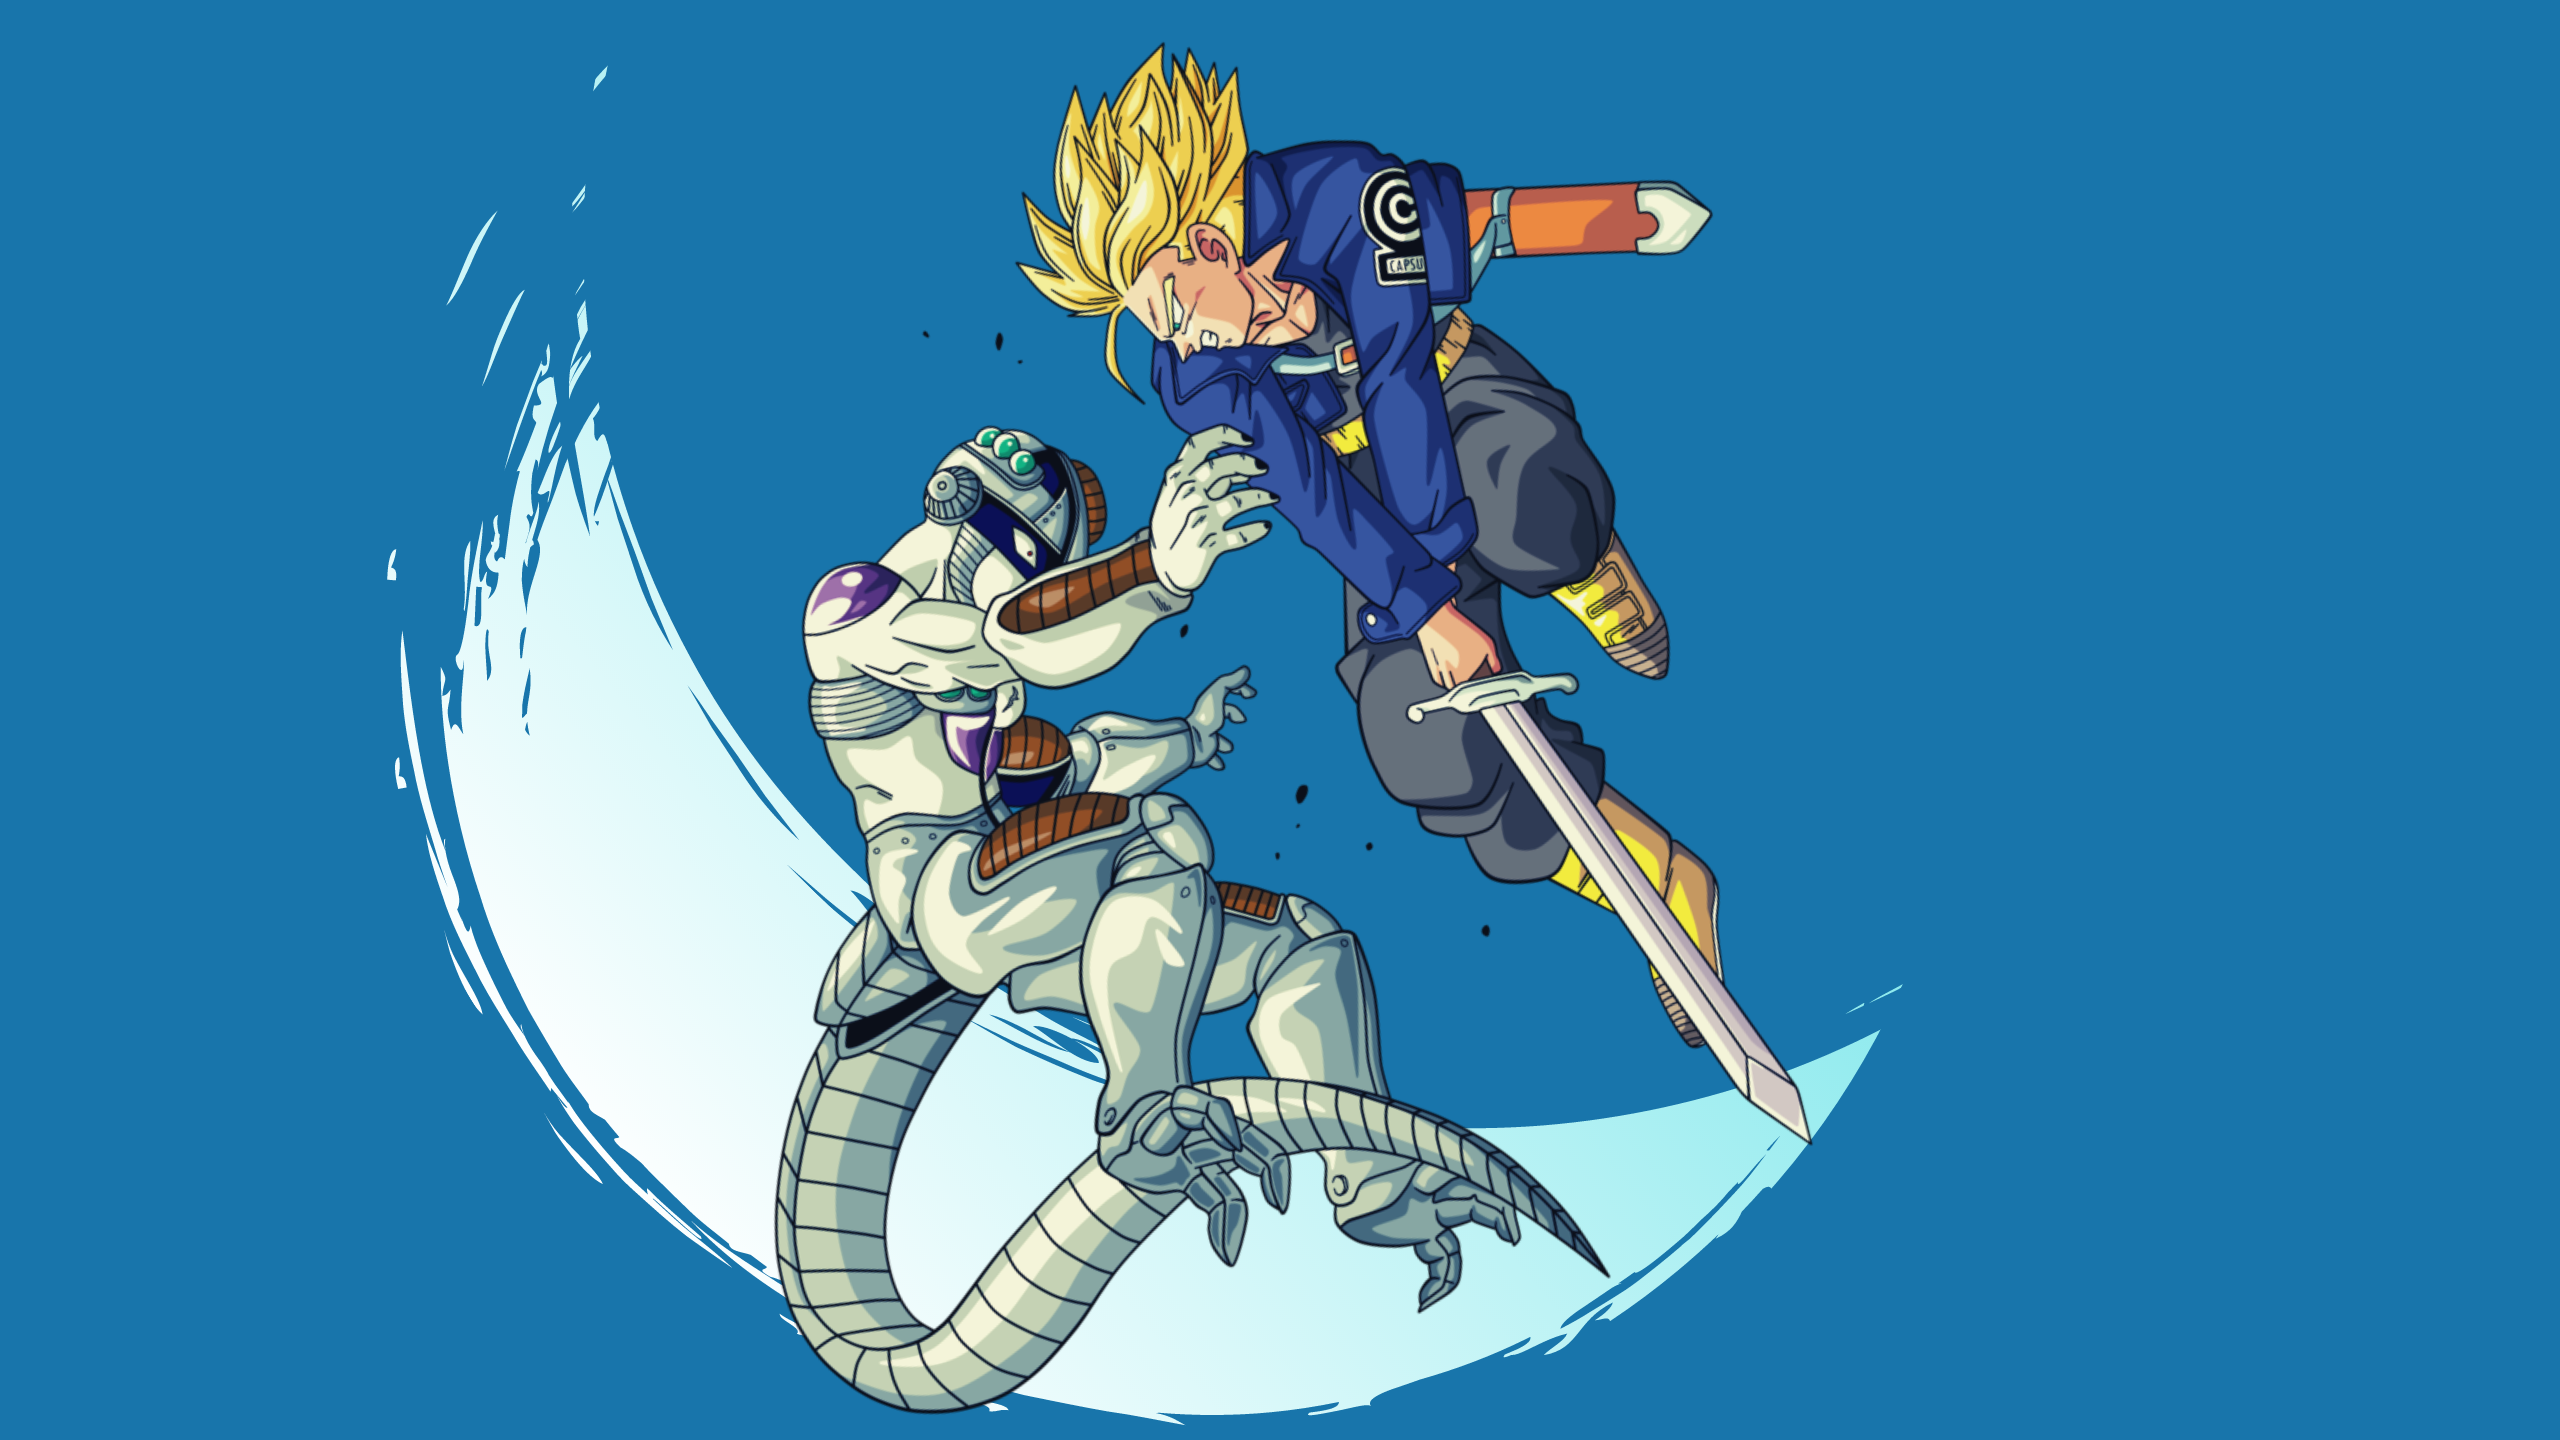 Free download Simple Wallpaper of Trunks ]2560x1440 works also for 1920x1080 [2560x1440] for your Desktop, Mobile & Tablet. Explore Trunks Wallpaper. DBZ Trunks Wallpaper, Future Trunks Wallpaper, Trunks Super Saiyan Wallpaper